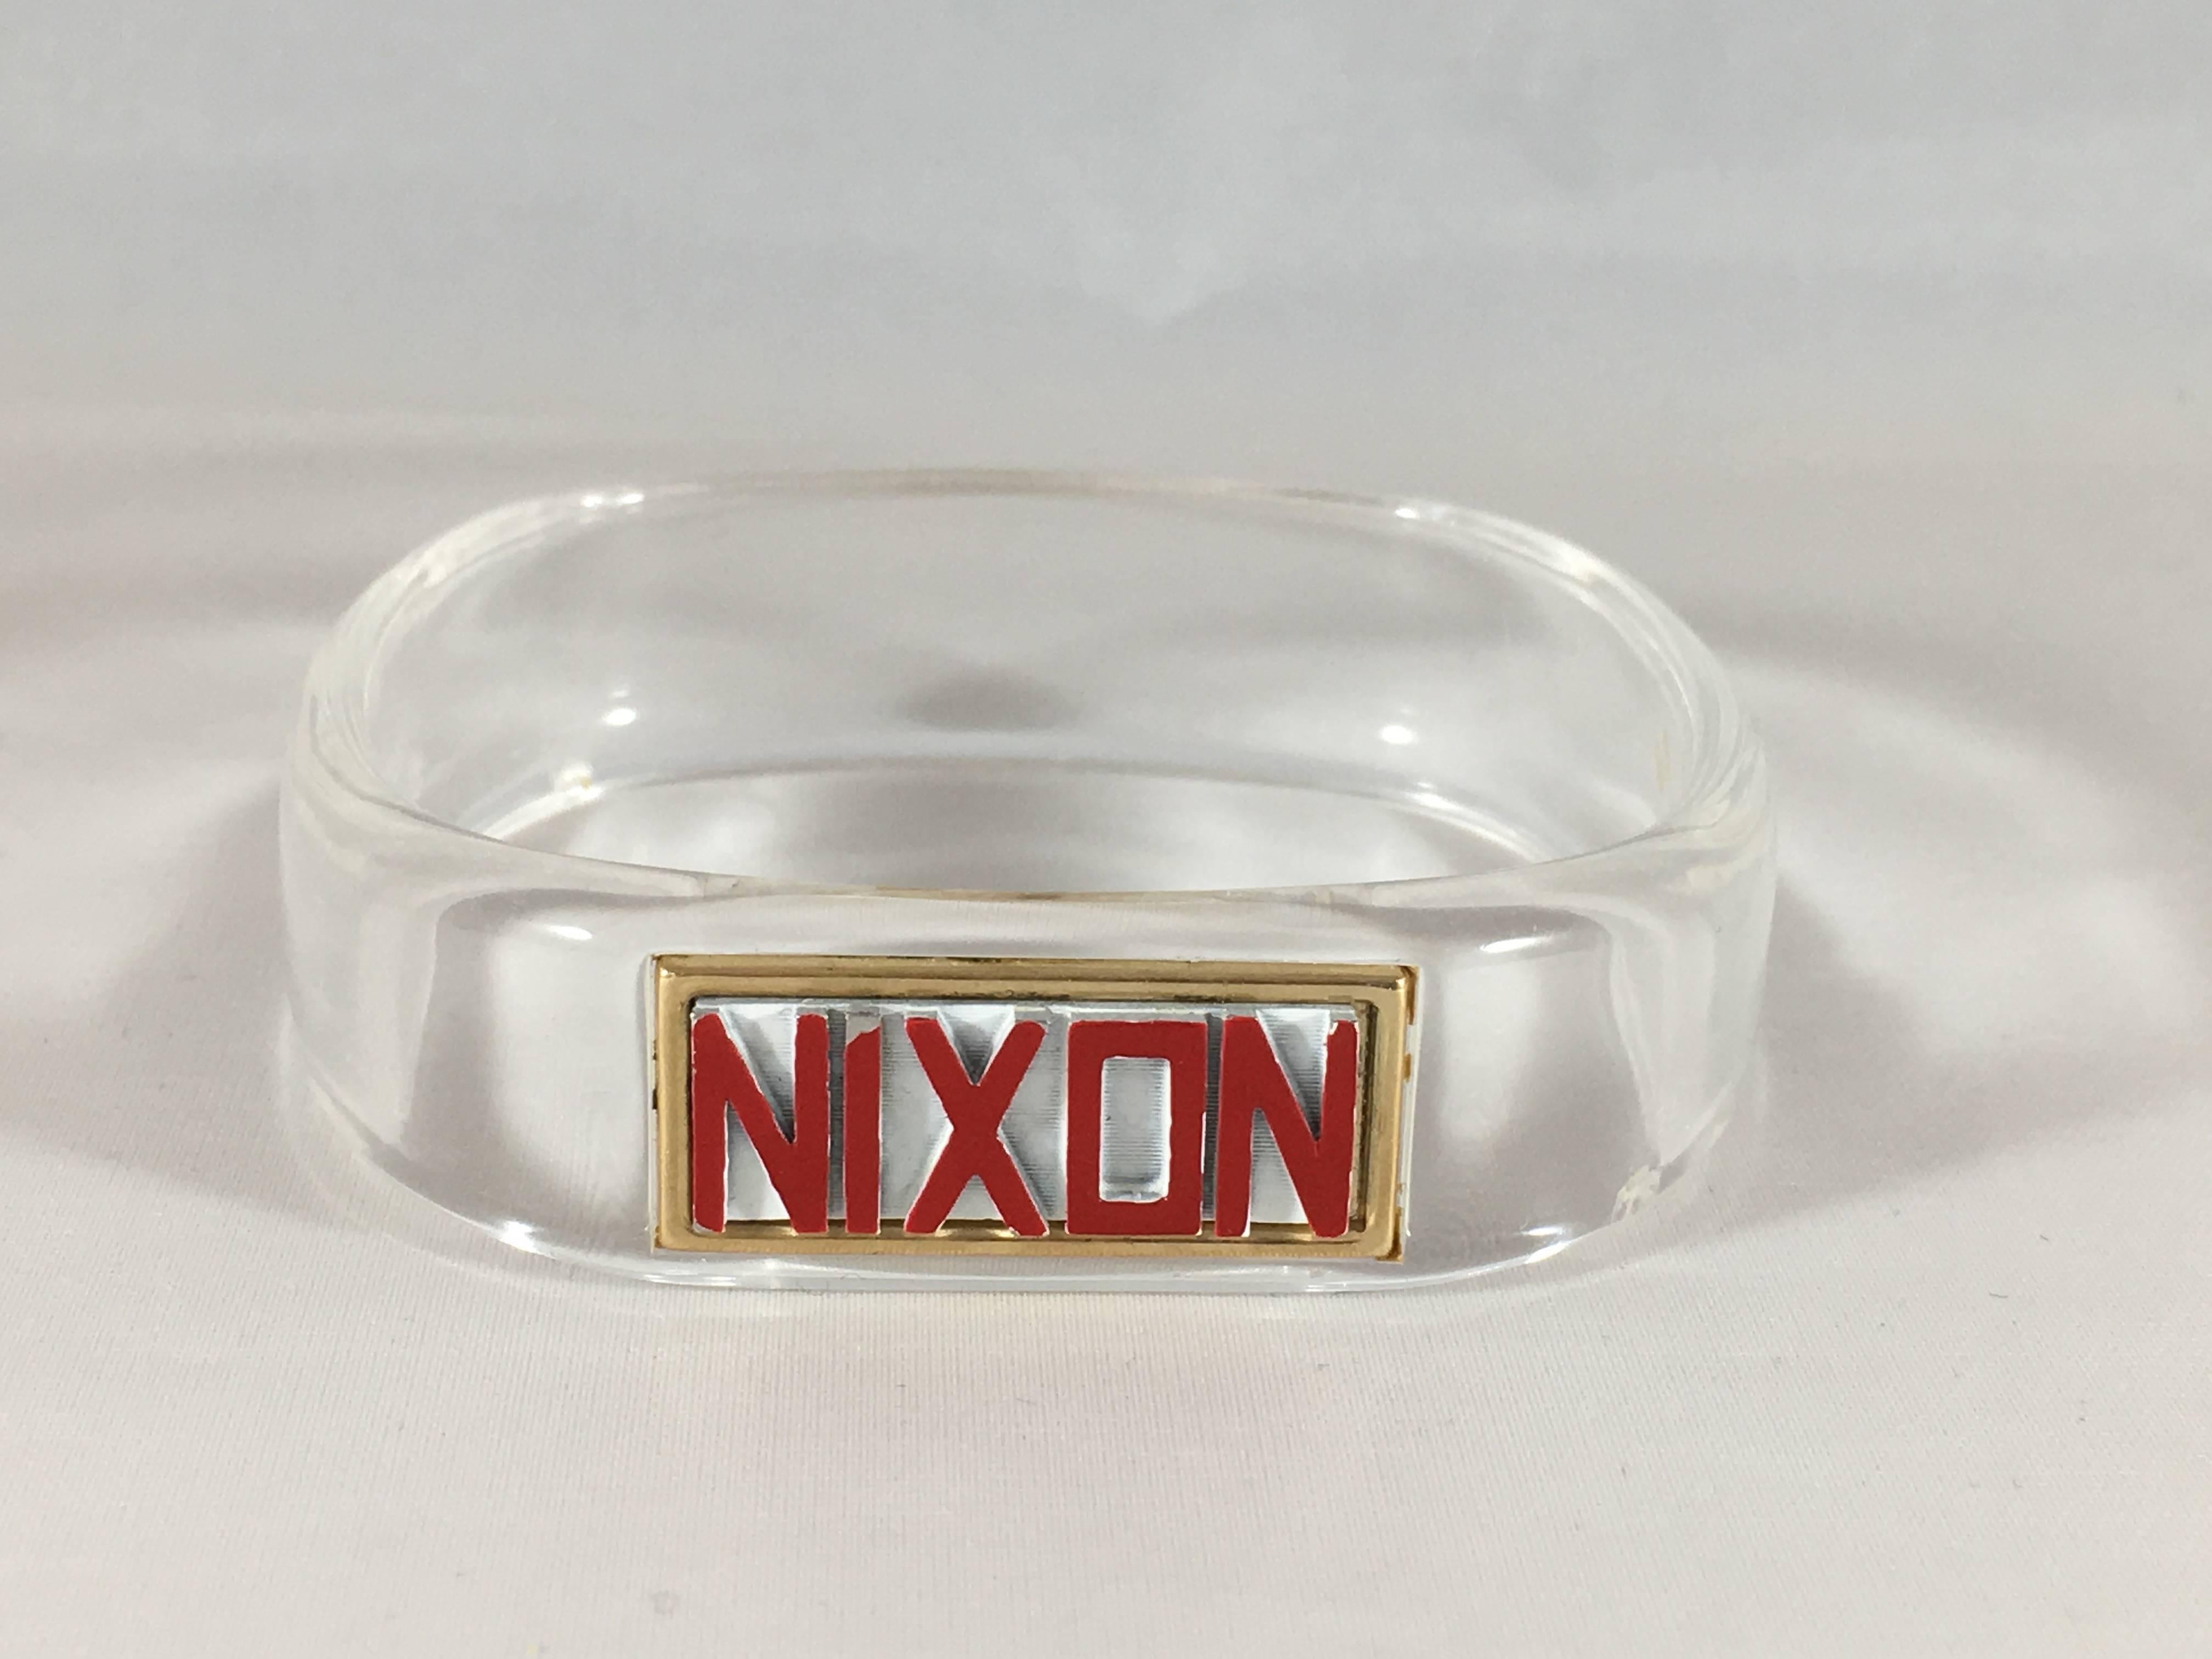 This is a collectible 1960s Trifari clear lucite 'Nixon' bangle bracelet. It has a red and white enameled gold-tone plate inserted into it that reads, 'Nixon'. It was most likely made in 1968 for the Presidential campaign. It has a great mid-century